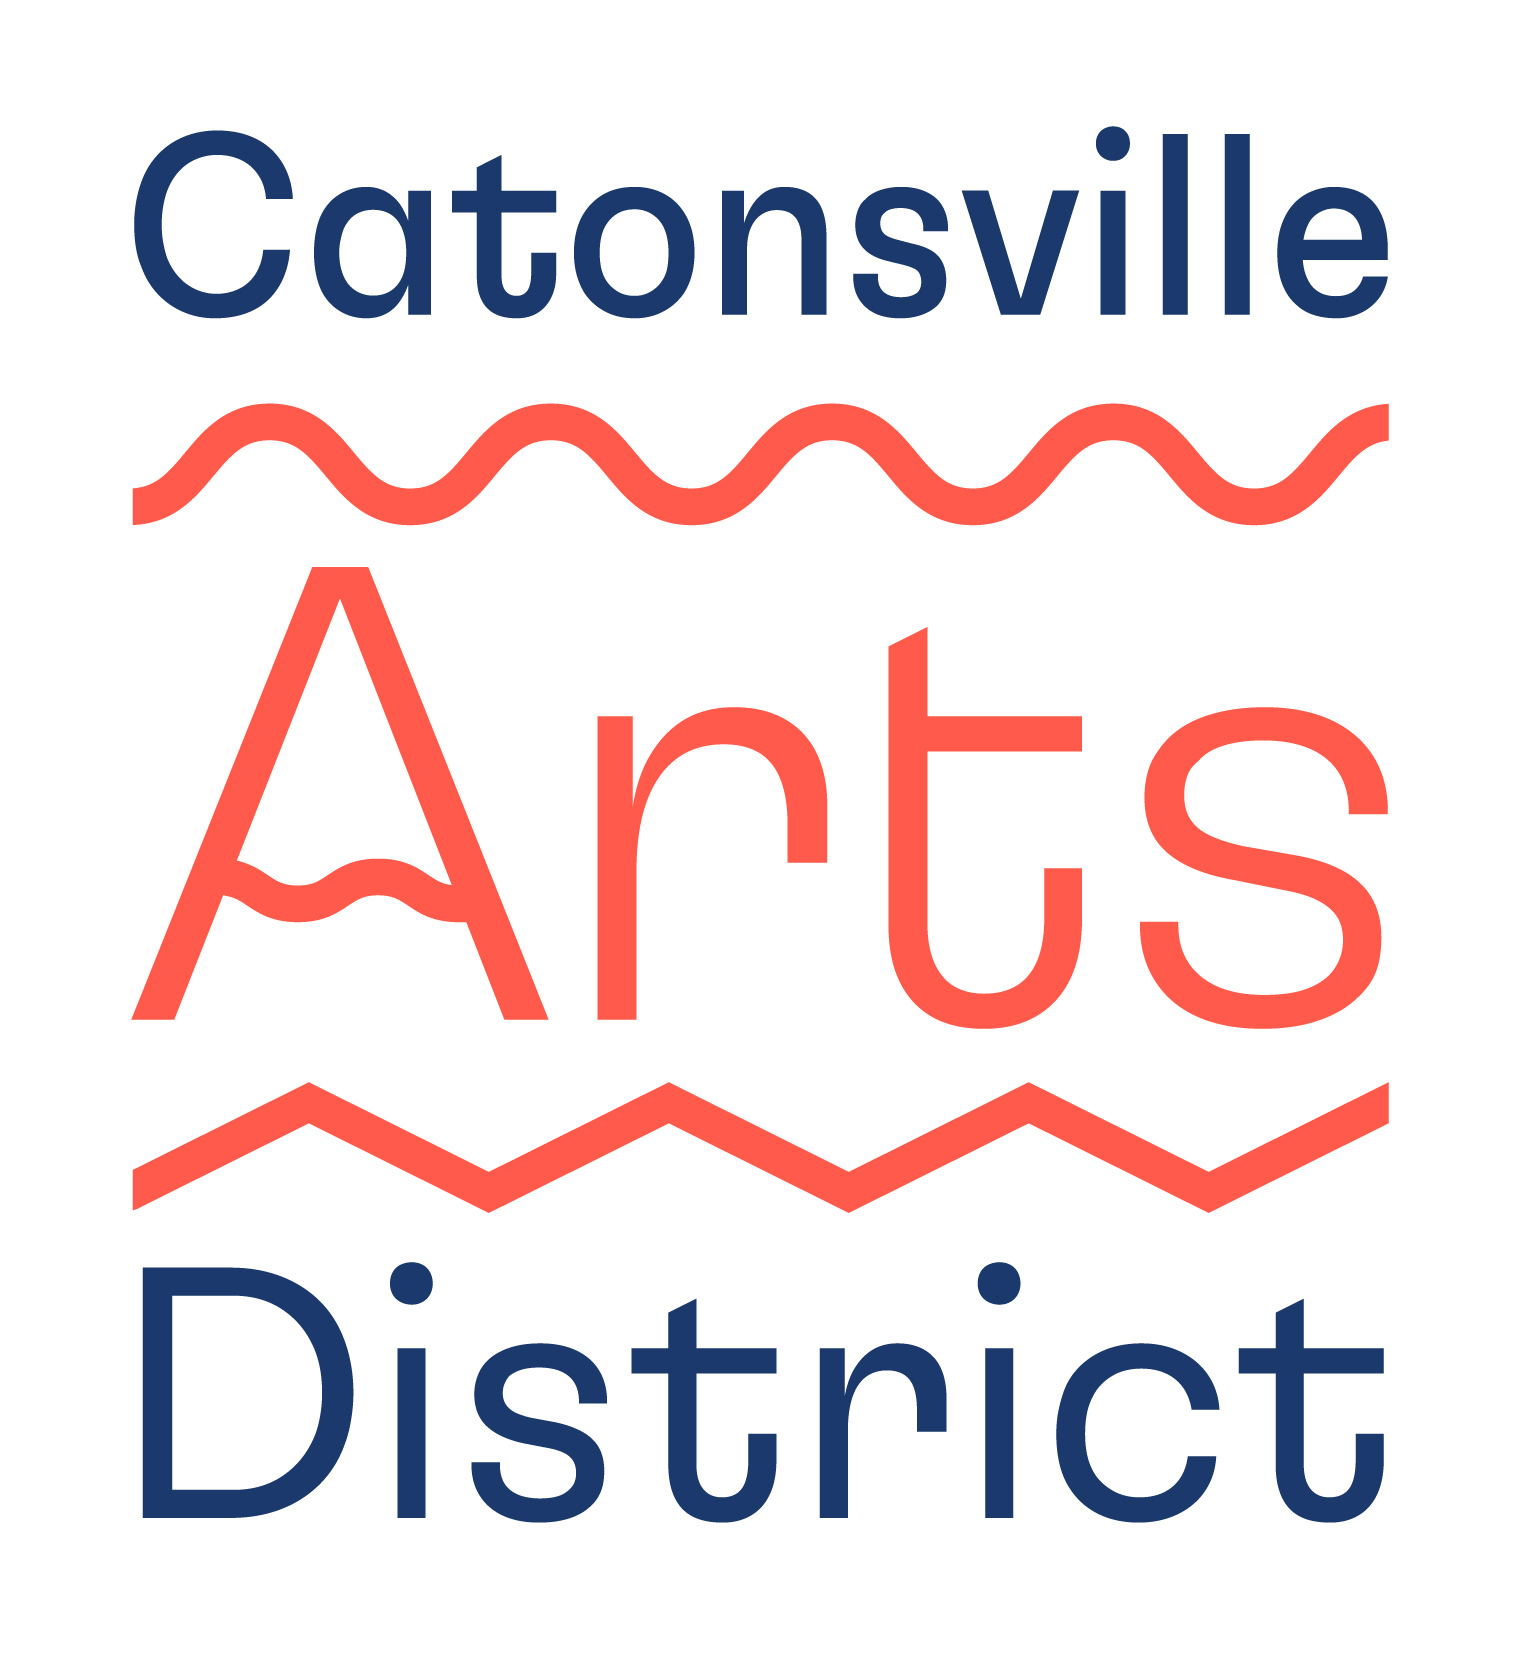 A logo with wavy lines says Catonsville Arts District